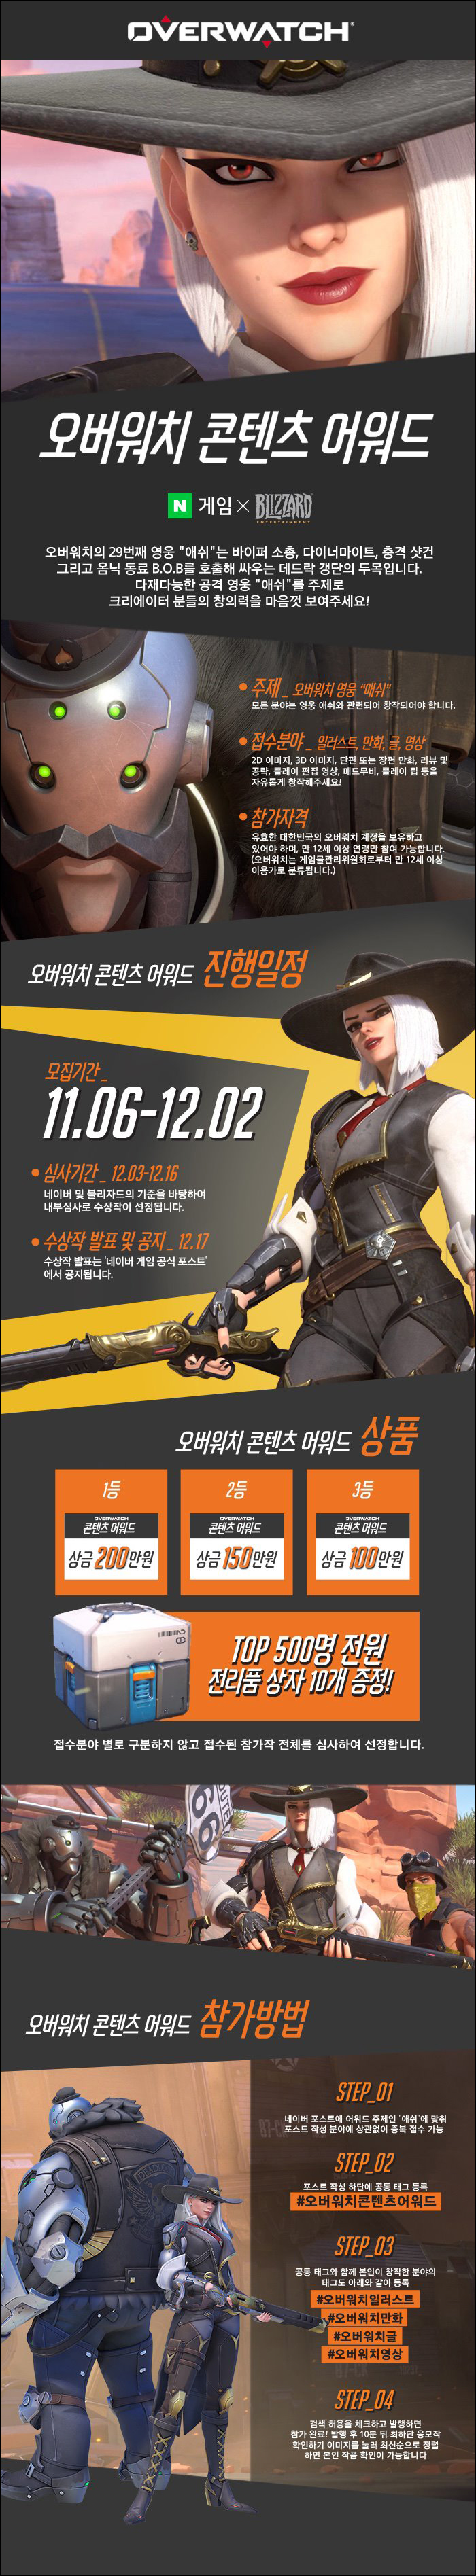 Blizzard_Overwatch_Content_Awards(with_NAVER)_DDB_Korea_181106_revised2.jpg